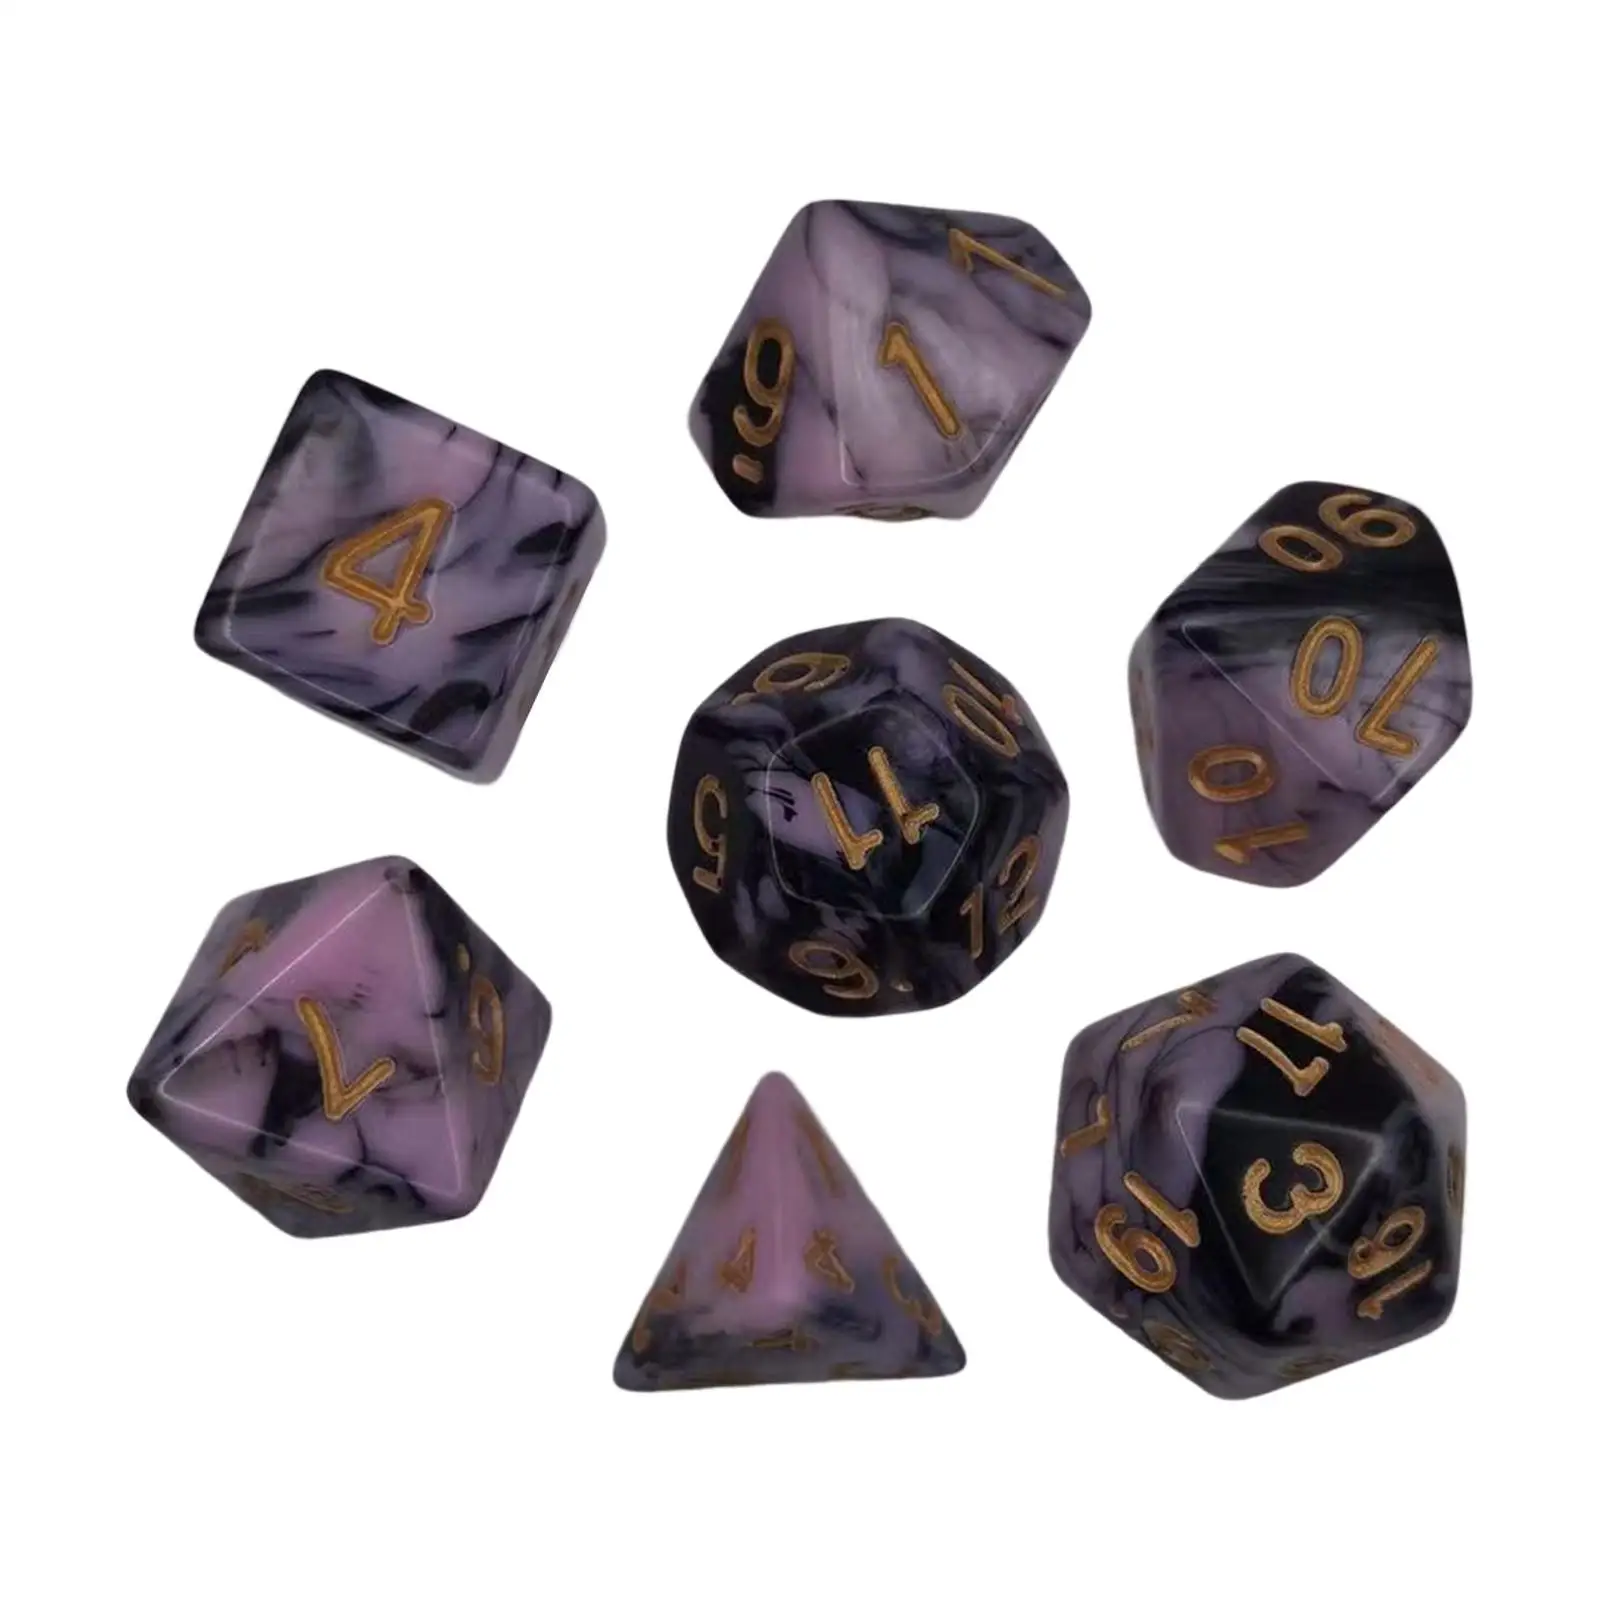 7 Pieces Colorful Polyhedral Dices Gifts Collection Board Game Props D4-D20 Durable Acrylic for Cafe Bar RPG Tabletop Games